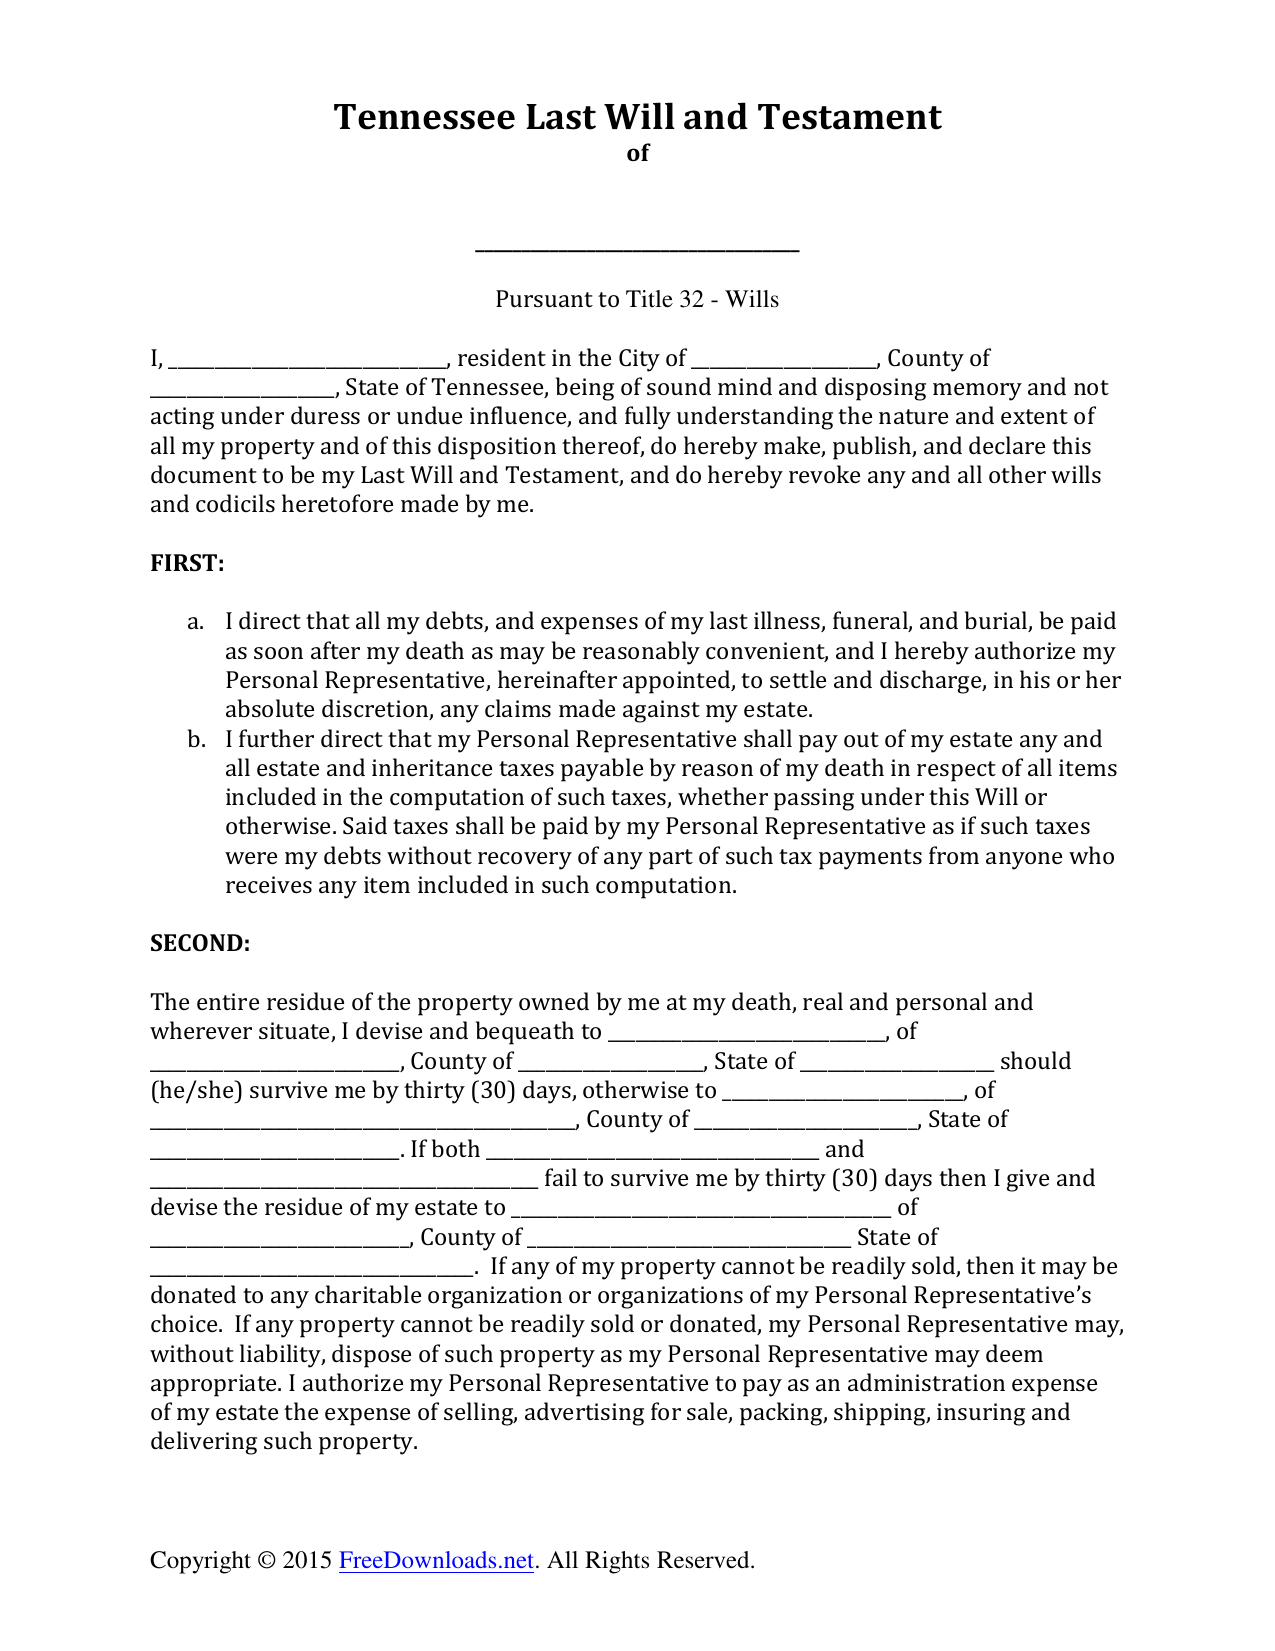 download-tennessee-last-will-and-testament-form-pdf-rtf-word